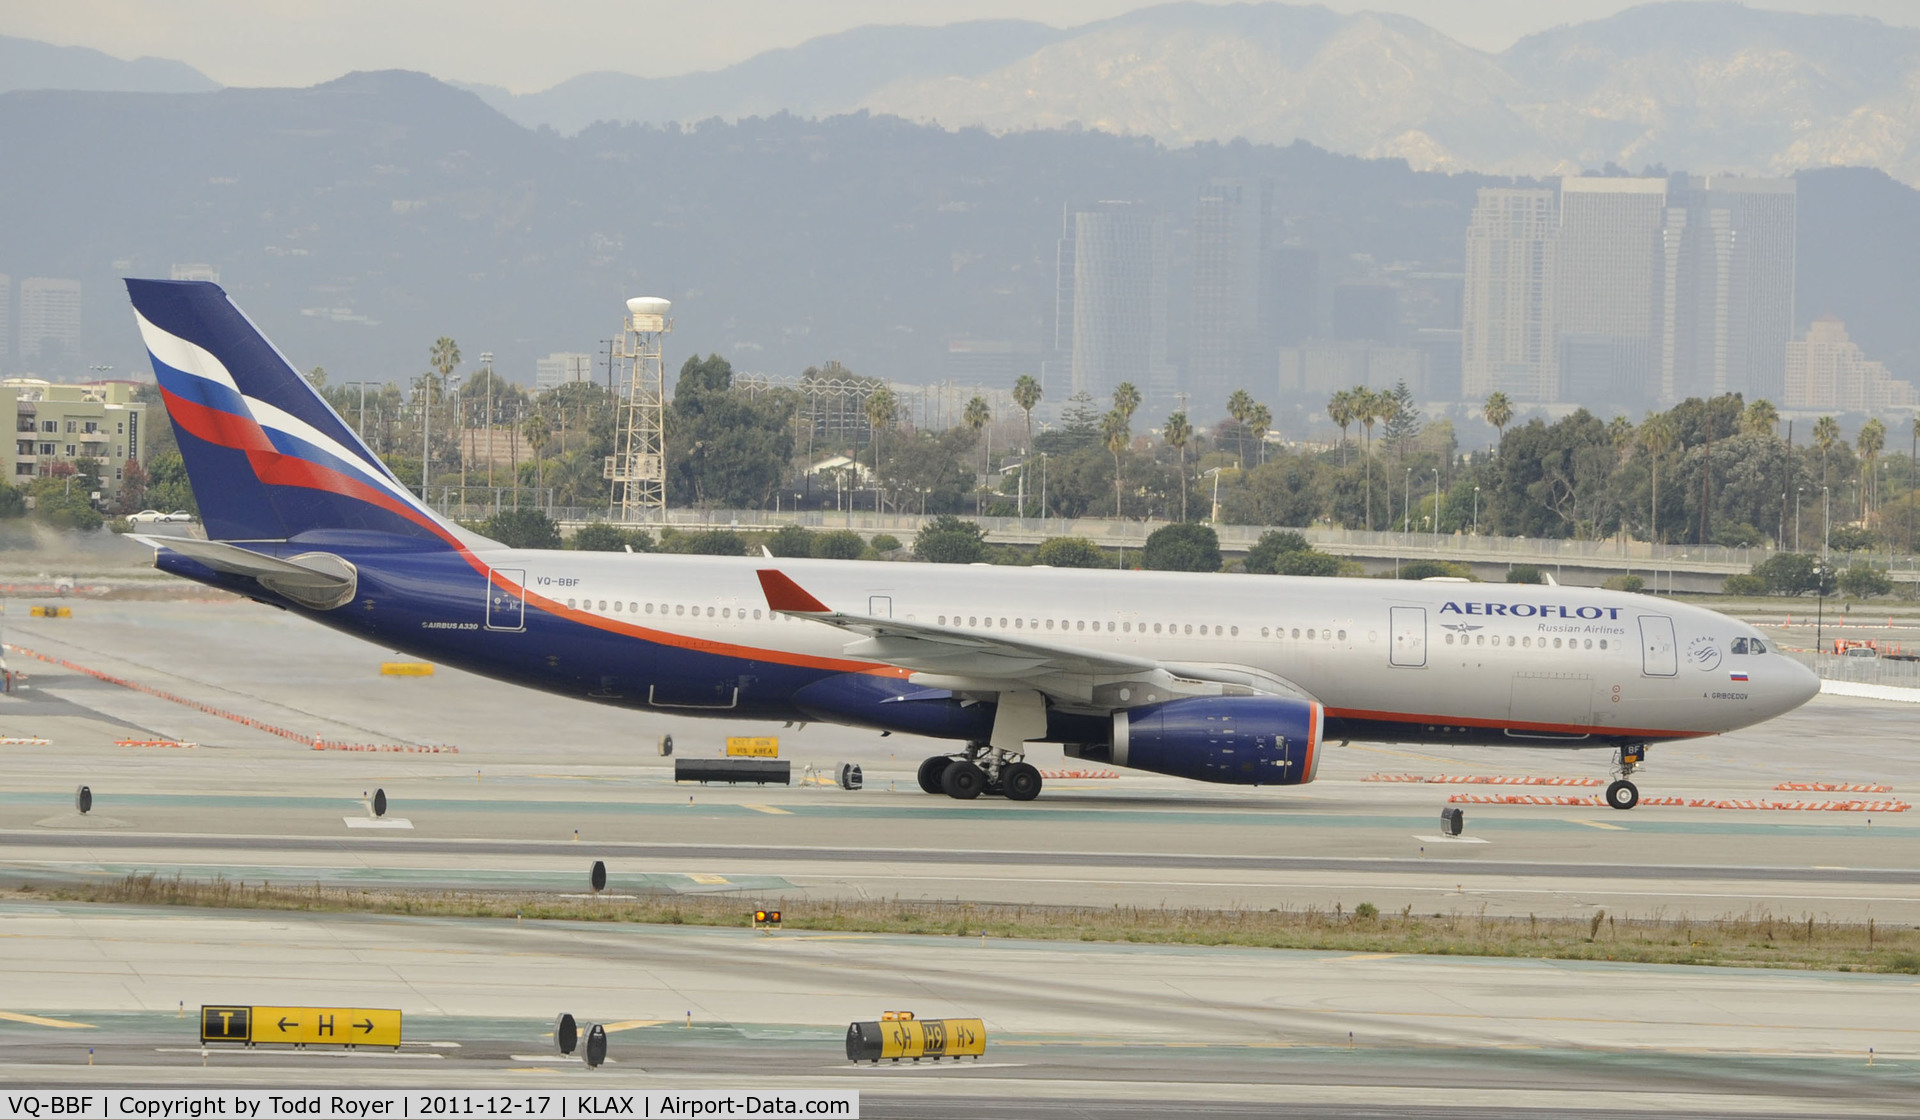 VQ-BBF, 2009 Airbus A330-243 C/N 1045, Taxiing at LAX